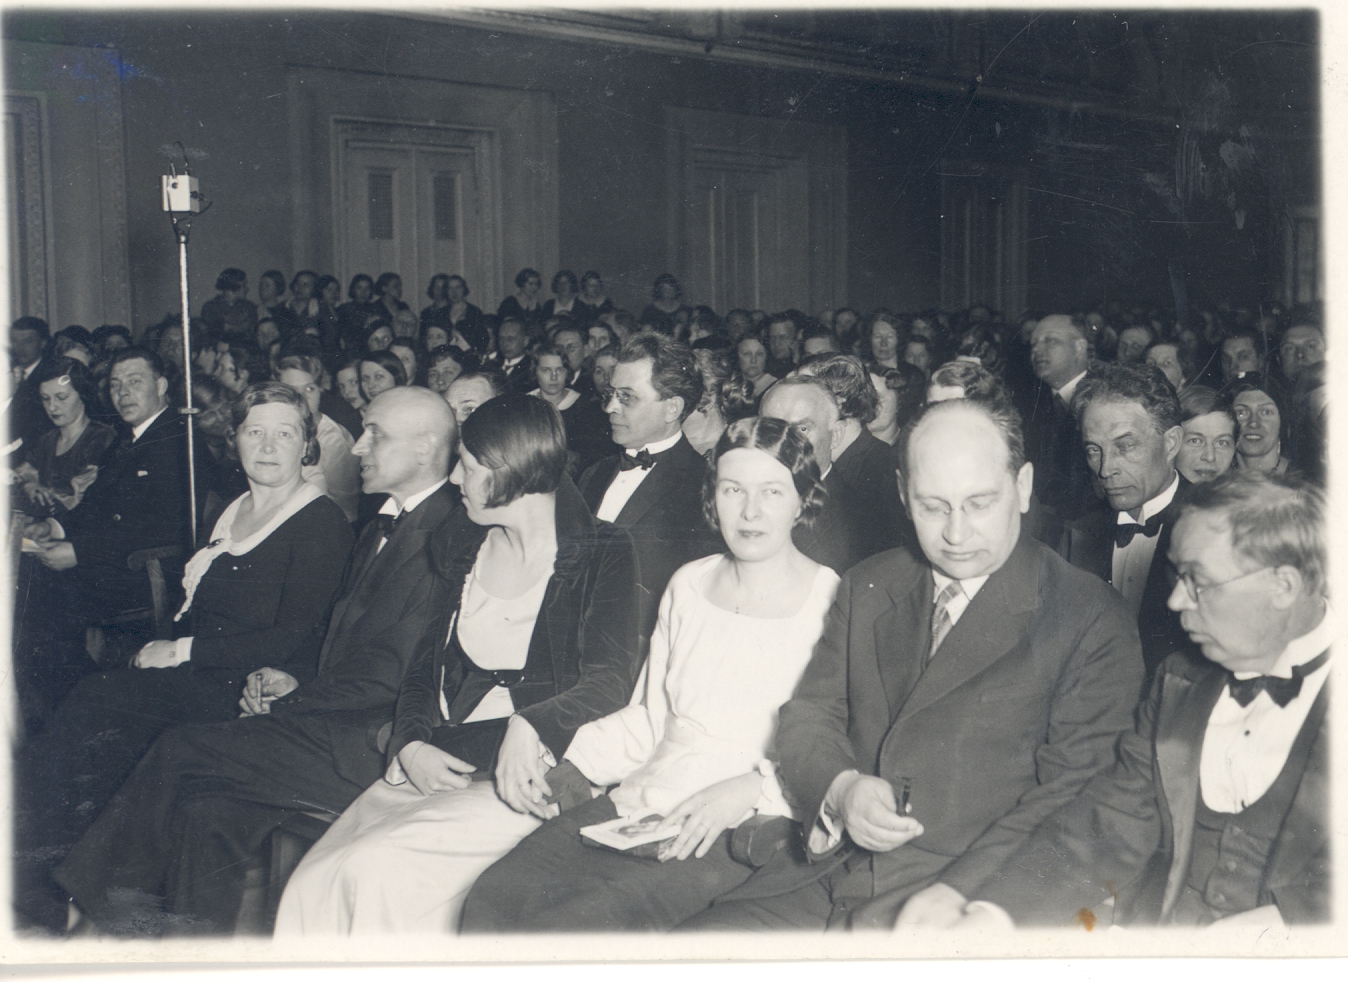 The 30th birthday acts of m. Under at the concert hall "Estonia" 30.03.1933. VAS. : m. Under, a. Adson, h. Hacker, d. Hacker, a. All, Ed. Hubel